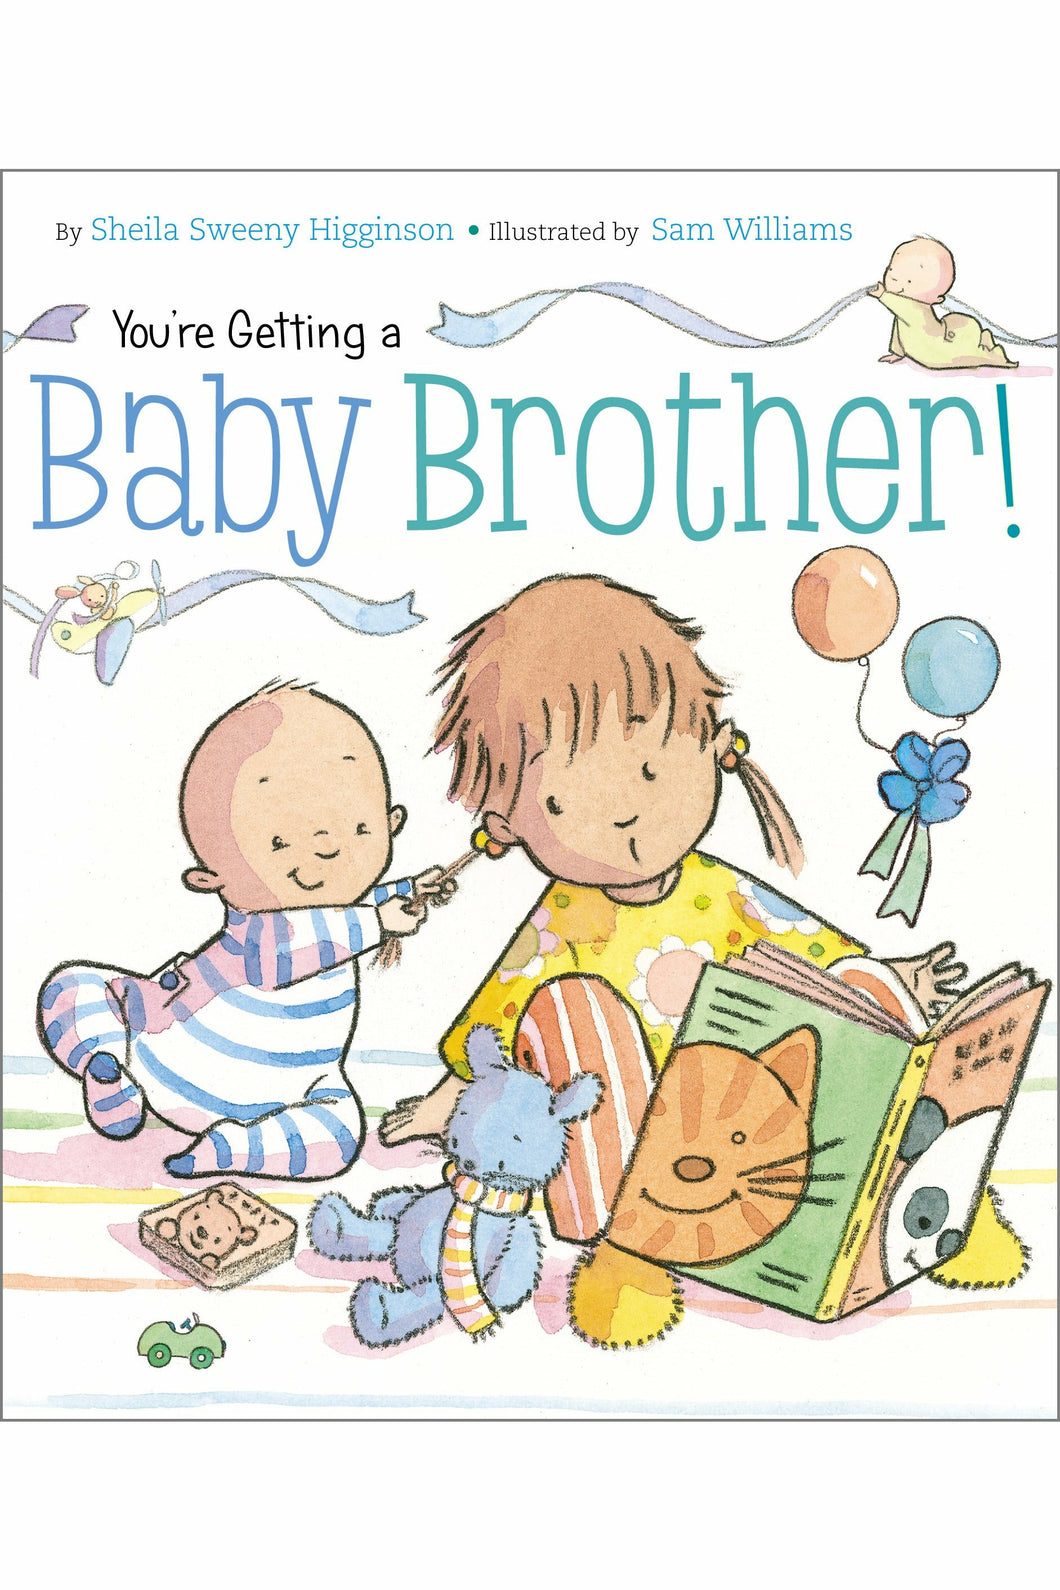 YOU'RE GETTING A GETTING A BABY BROTHER